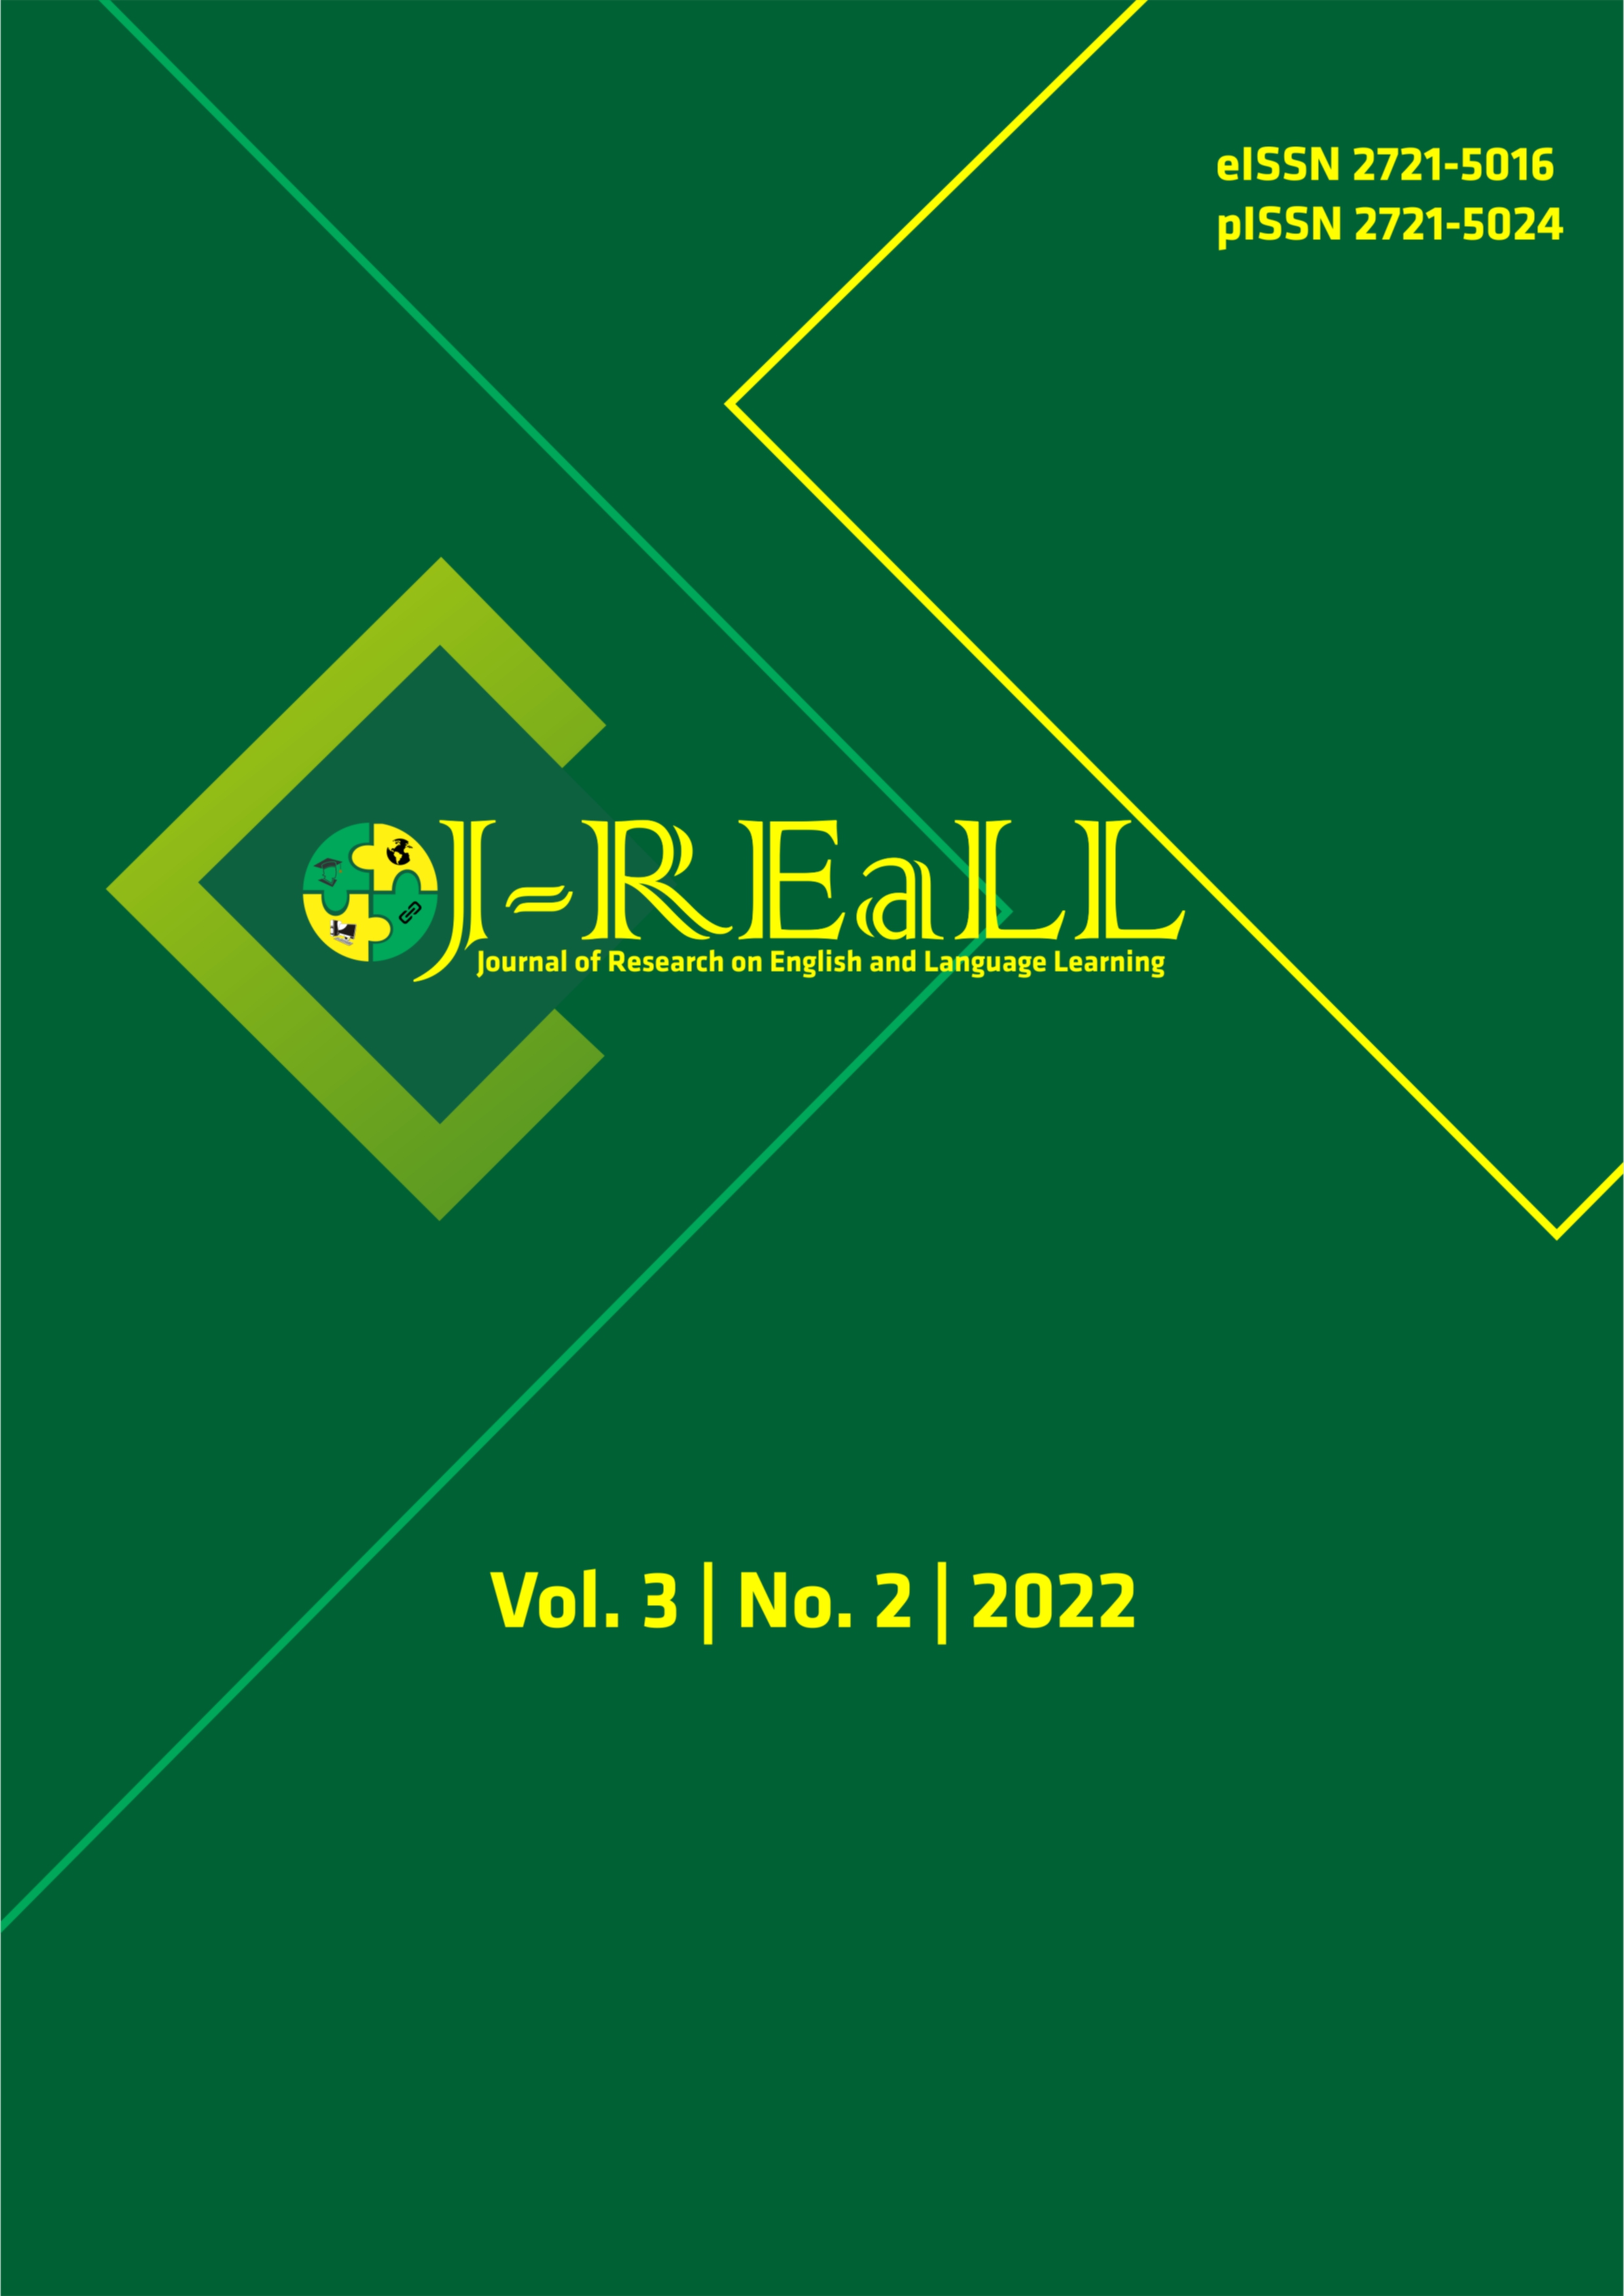 					View Vol. 3 No. 2 (2022): Journal of Research on English and Language Learning (J-REaLL)
				